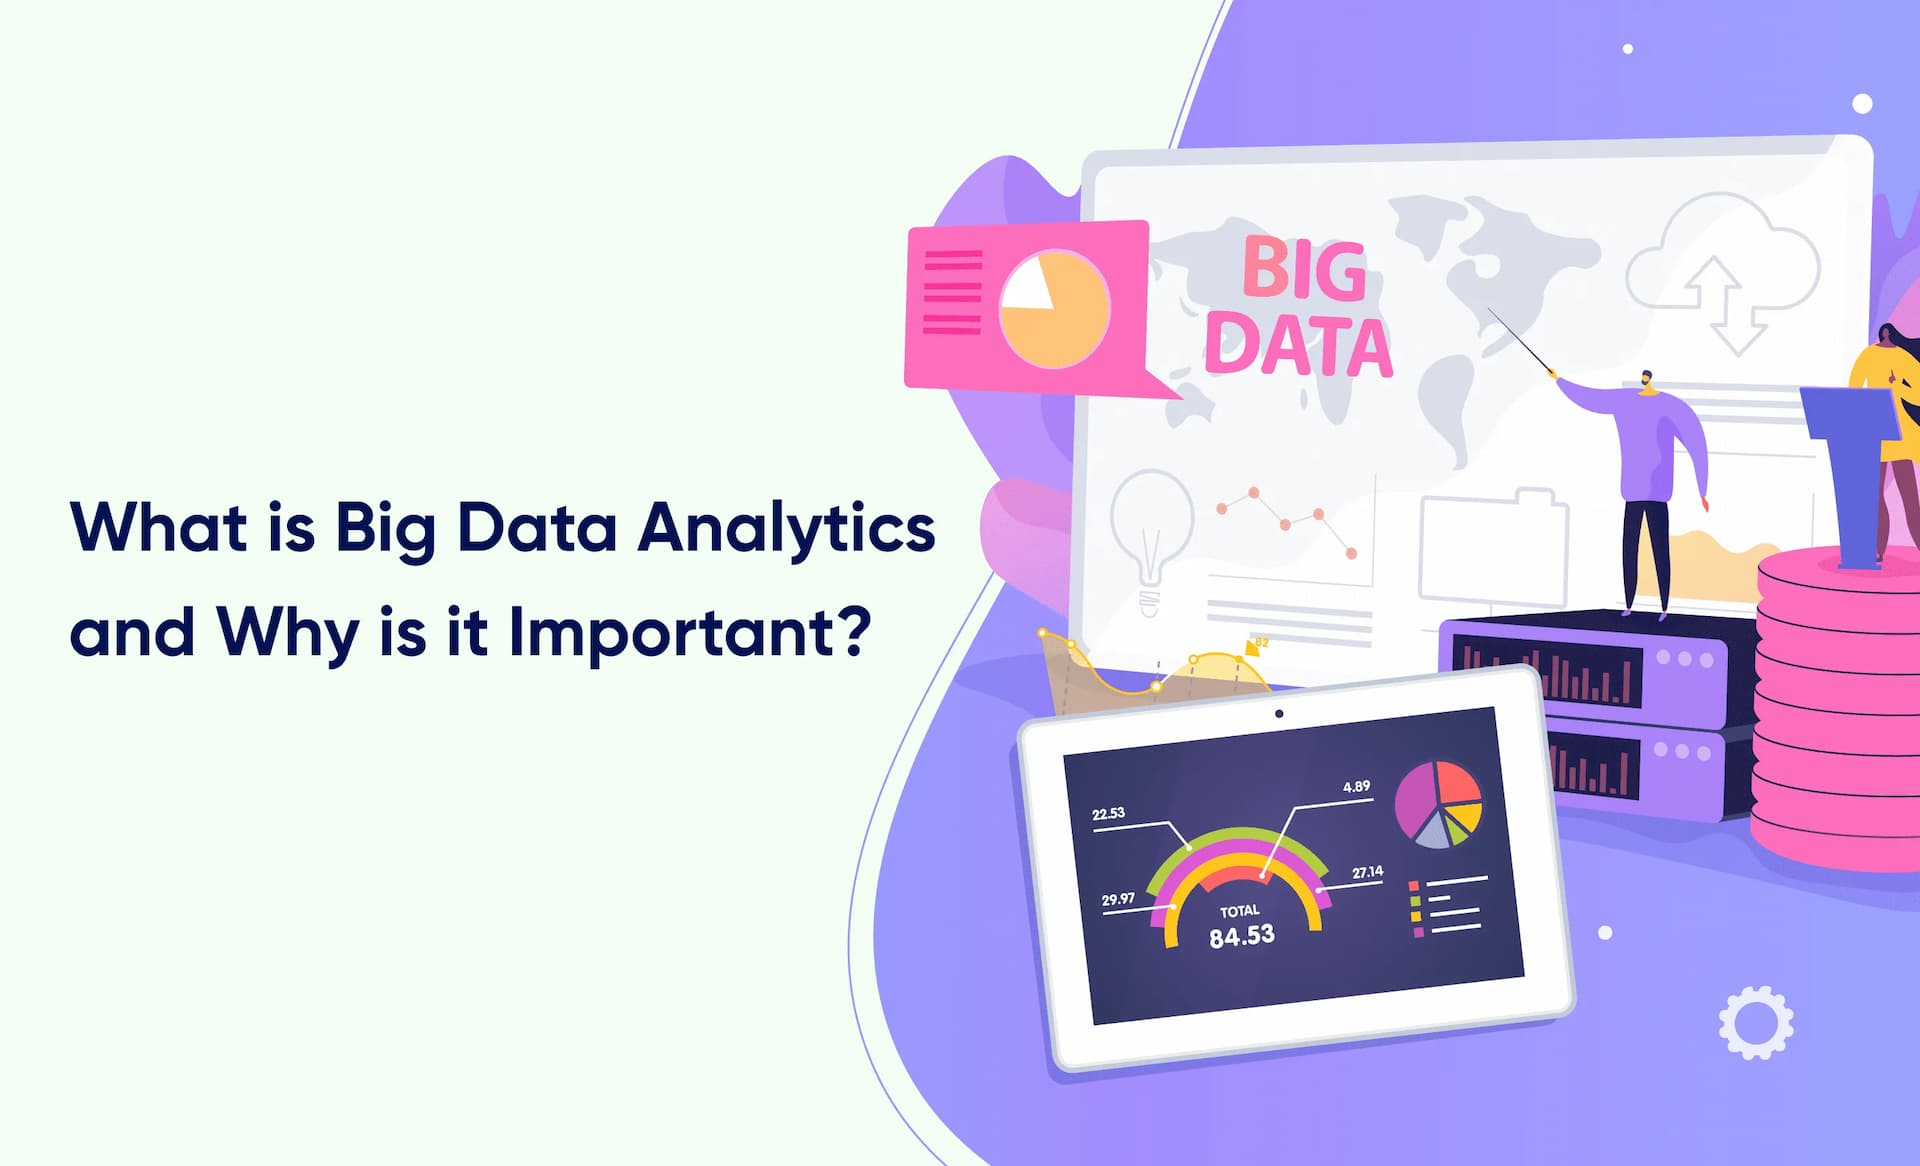 What is Big Data Analytics and Why is it Important?